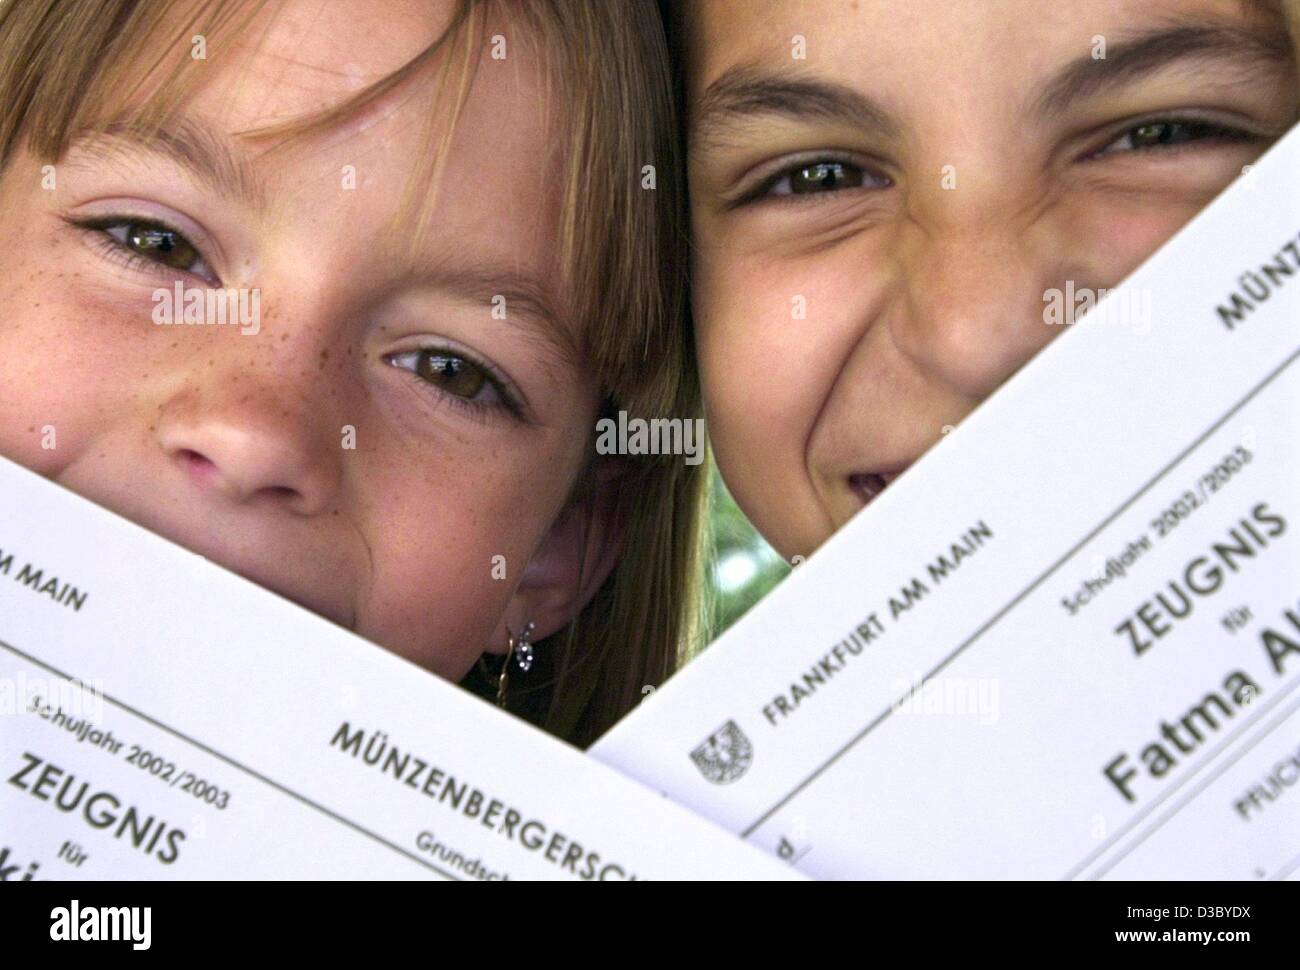 (dpa) - Fourth graders Saskia (L) and Fatma show their end-of-year school reports ('Zeugnis') at an elementary school in Frankfurt, 18 July 2003. The day was also the last day of school before the start of the summer holidays. Stock Photo